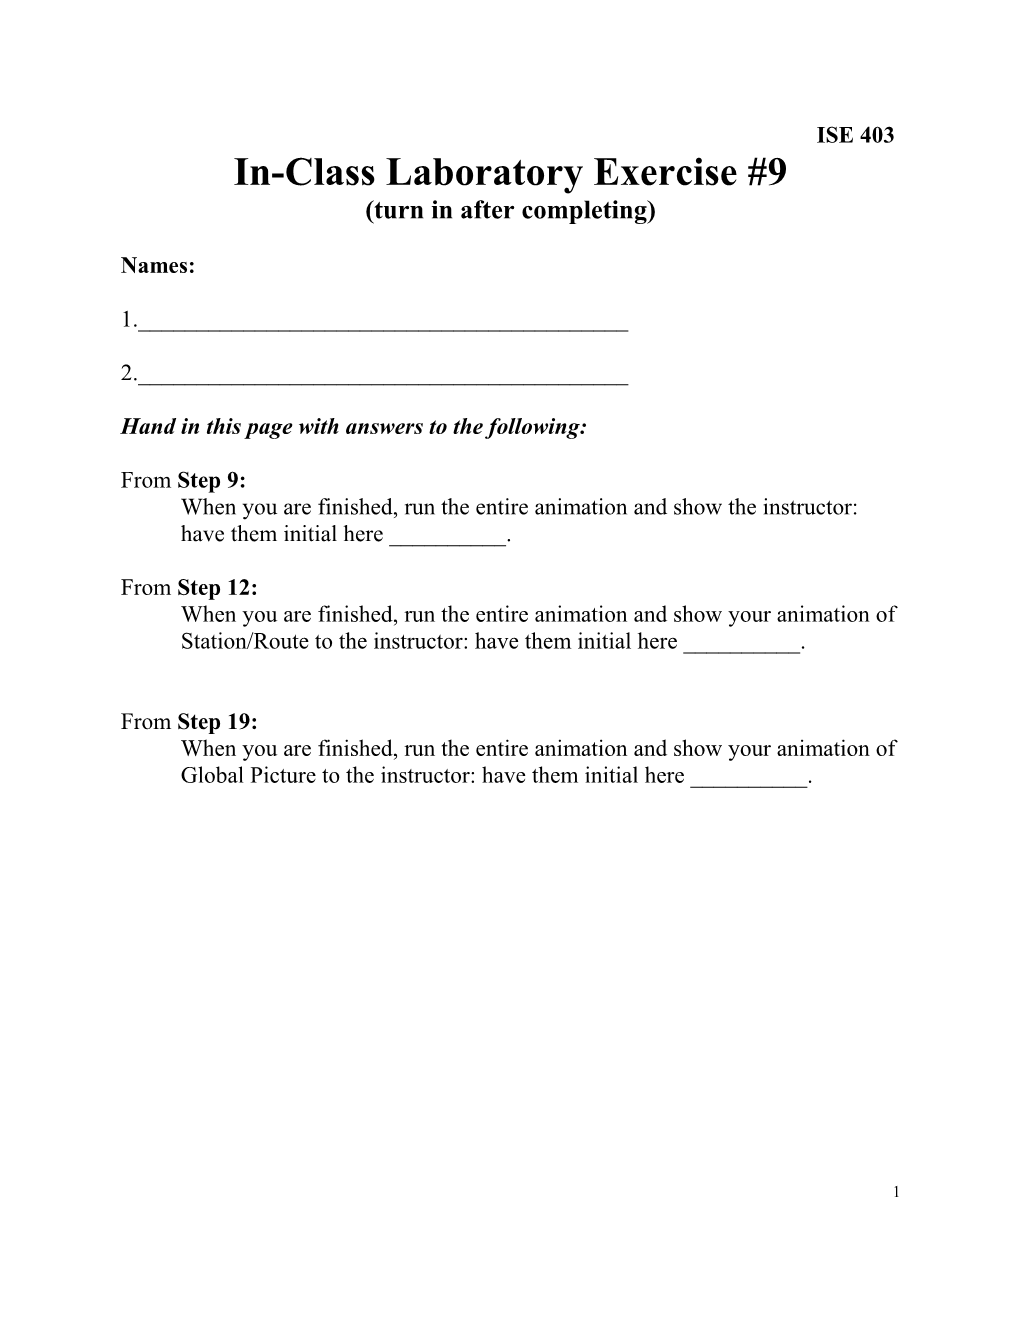 In-Class Laboratory Exercise #8